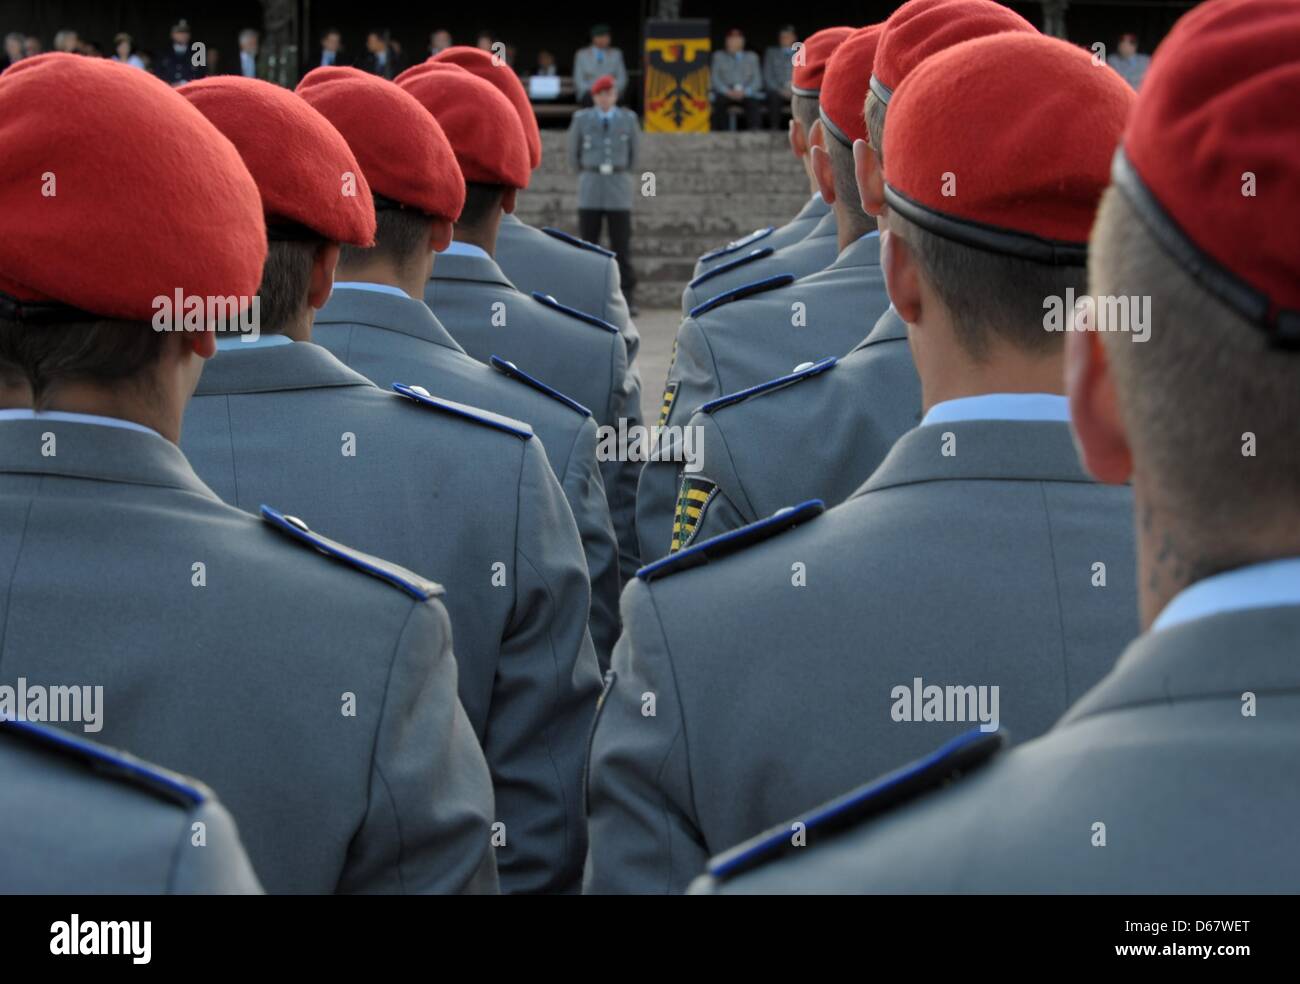 An archive photo dated 5 May 2011 shows soldiers of the German Federal Armed Force waiting to take their ceremonial vow at Kyffhaeuser Monument near Steinthaleben, Germany. On 29 June 2012, an officer promotion ceremony will be held for the first time at the Hofgarten (Court Garden) in Munich, Germany. Almost 600 officer candidates, among them 82 women and 20 officer candidates of  Stock Photo